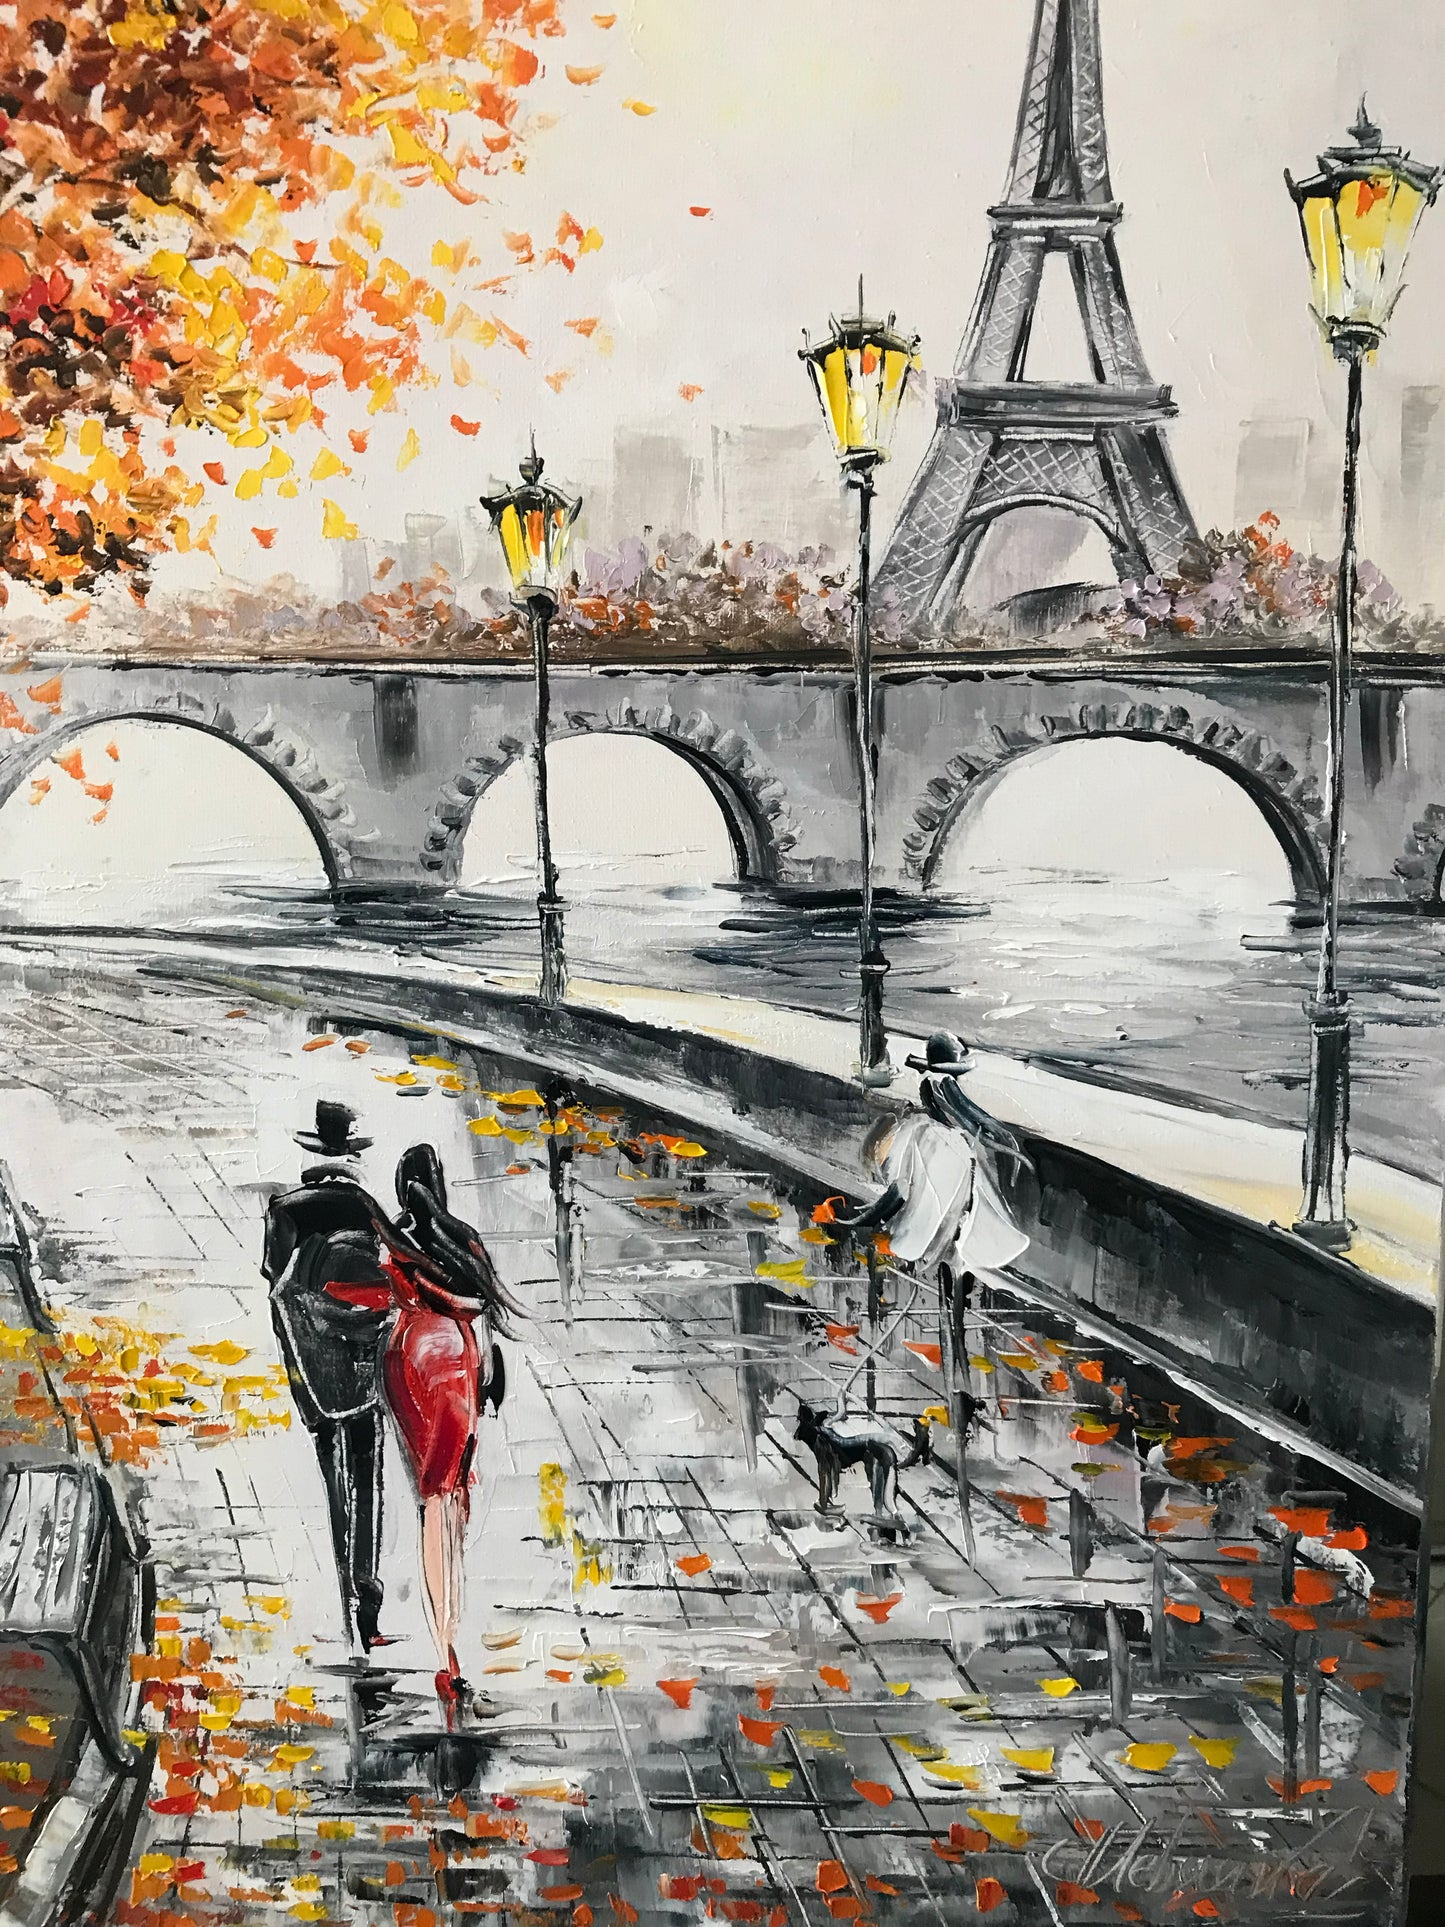 Autumn in Paris Painting on Canvas Romantic Couple Art Fall Oil Painting Eiffel Tower Wall Decor Paris Street Scene Oil Painting Romantic Painting